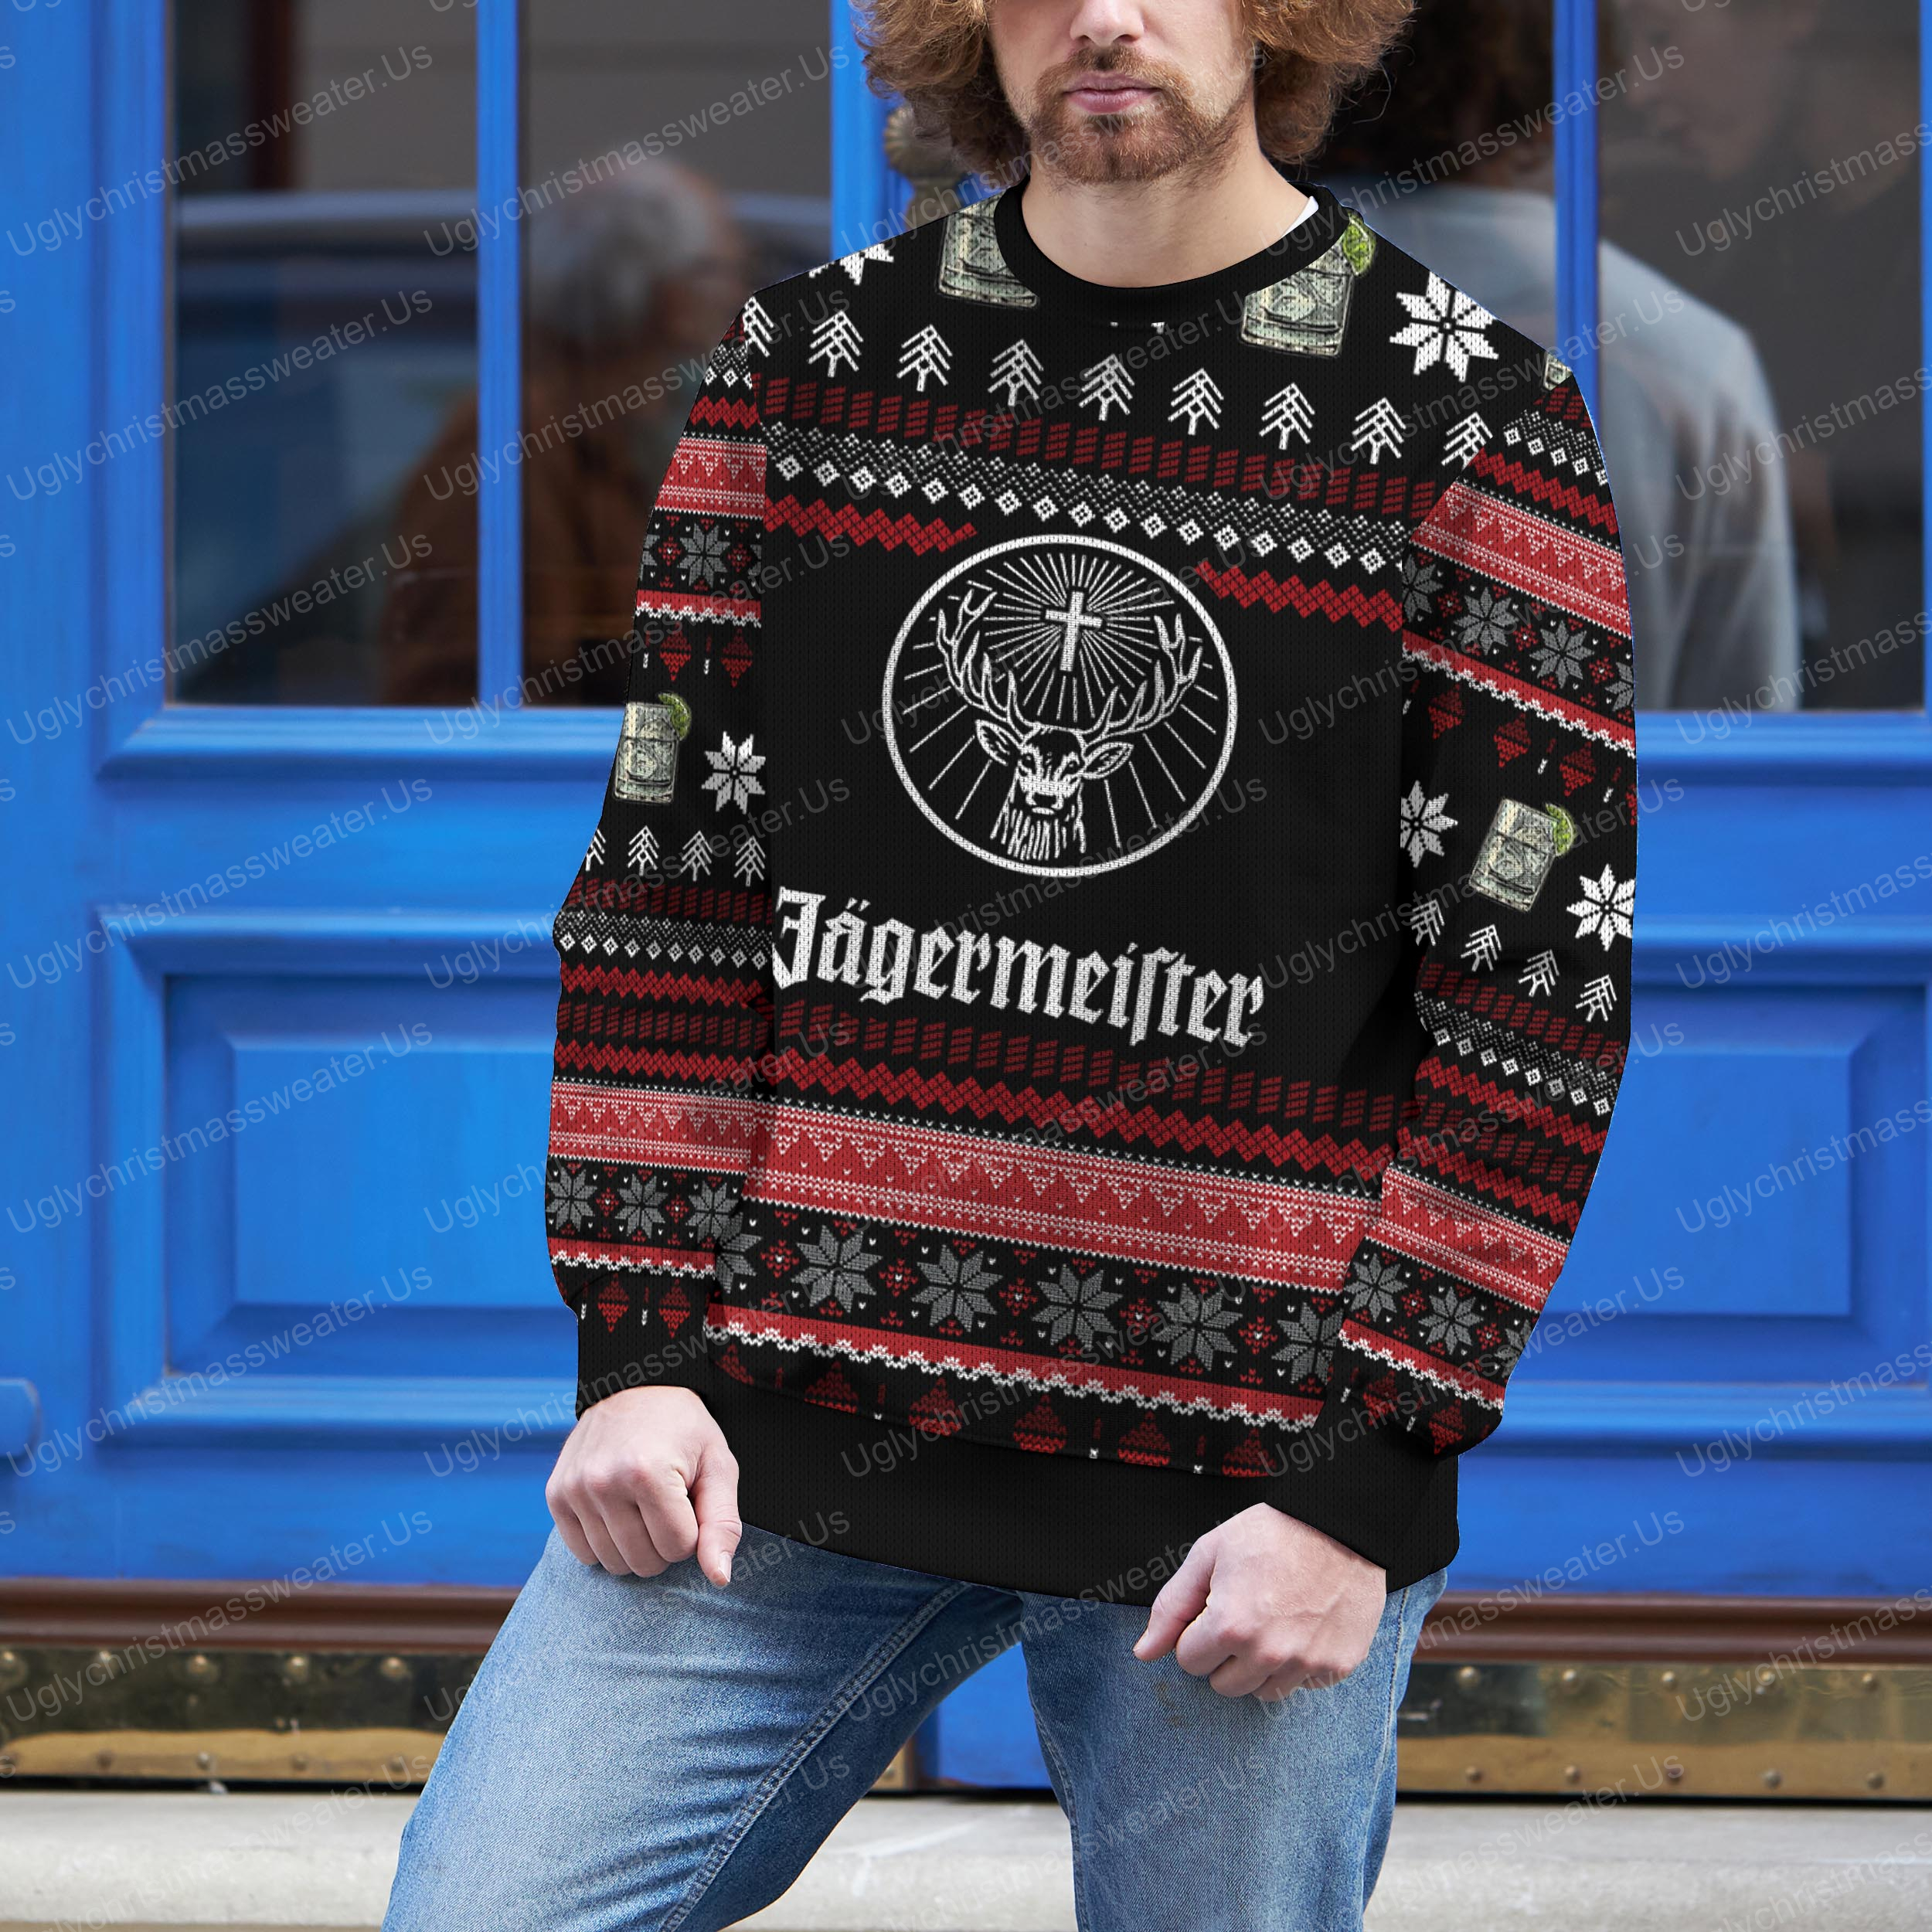 Winter Warmth: Red And Black Ugly Sweater Adorned With Jagermeister Logo And Snowflakes